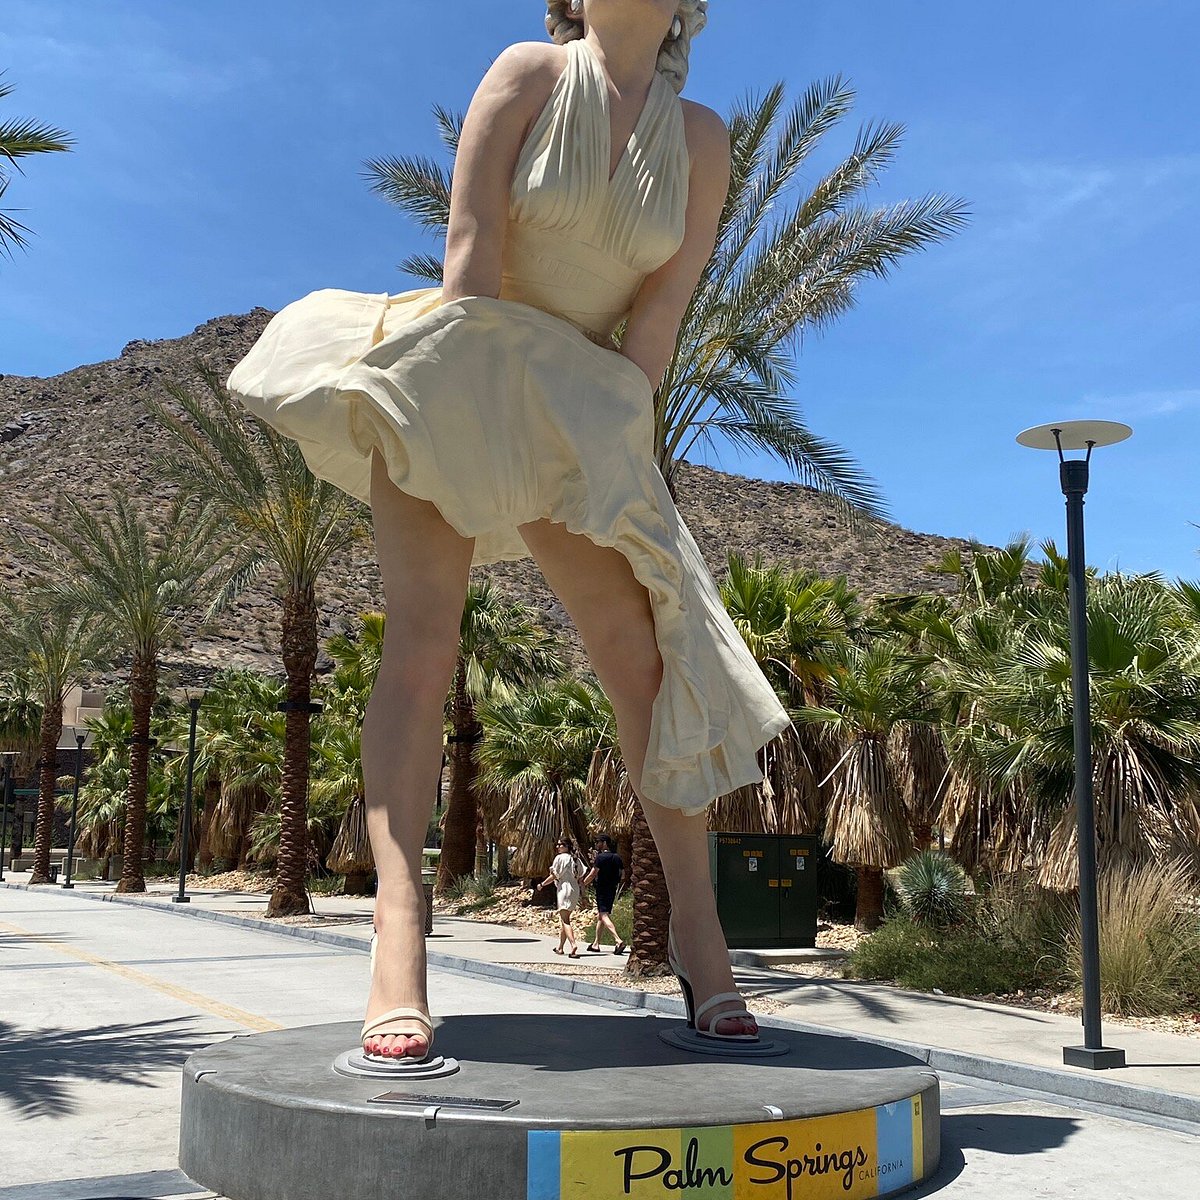 Forever Marilyn' statue of Marilyn Monroe statue to return to Palm Springs